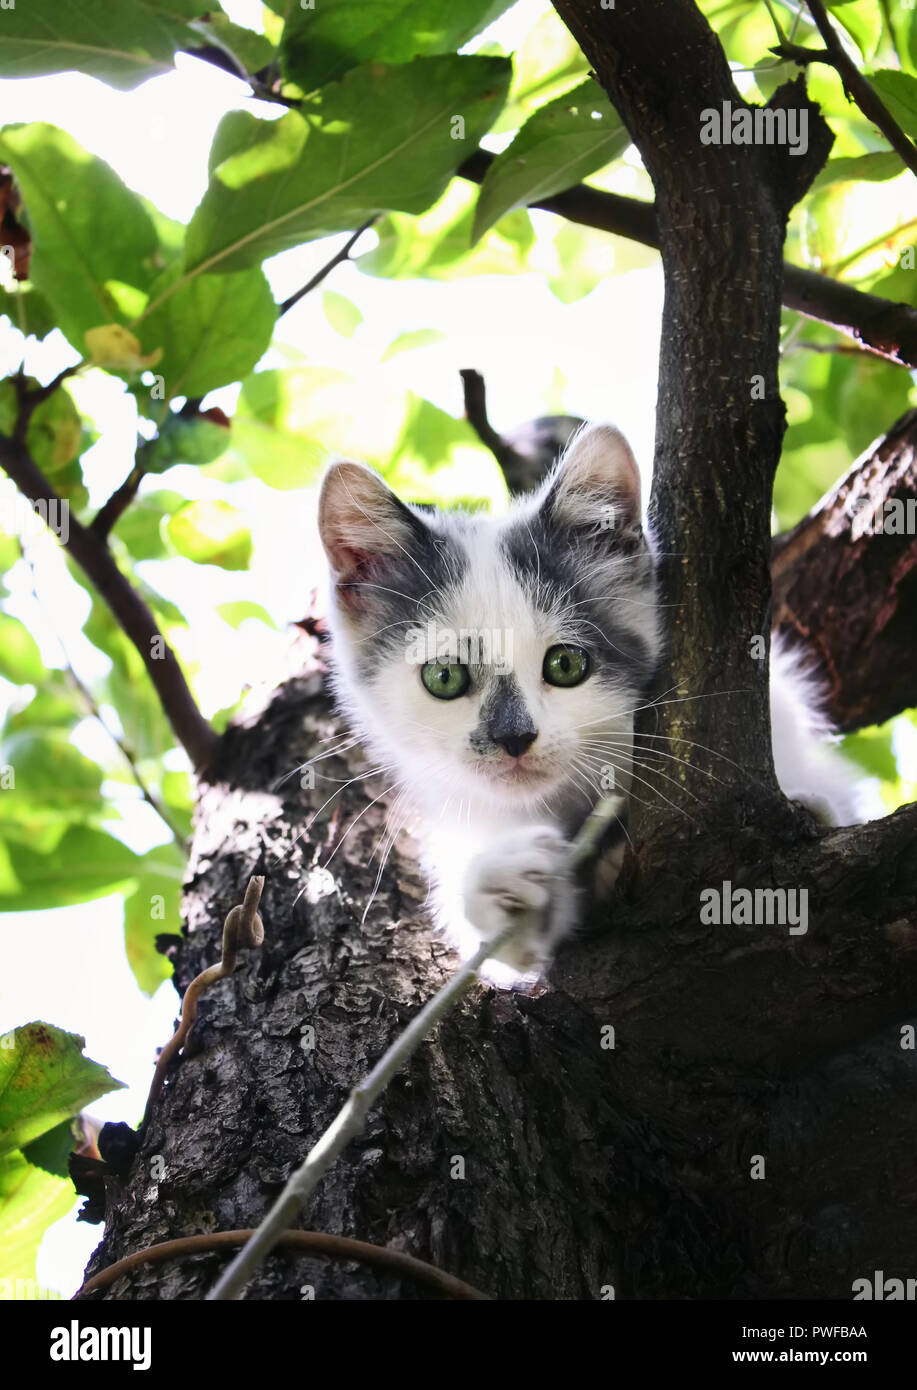 Small white kitten with gray spots climbed up on a tree in the garden. Stock Photo